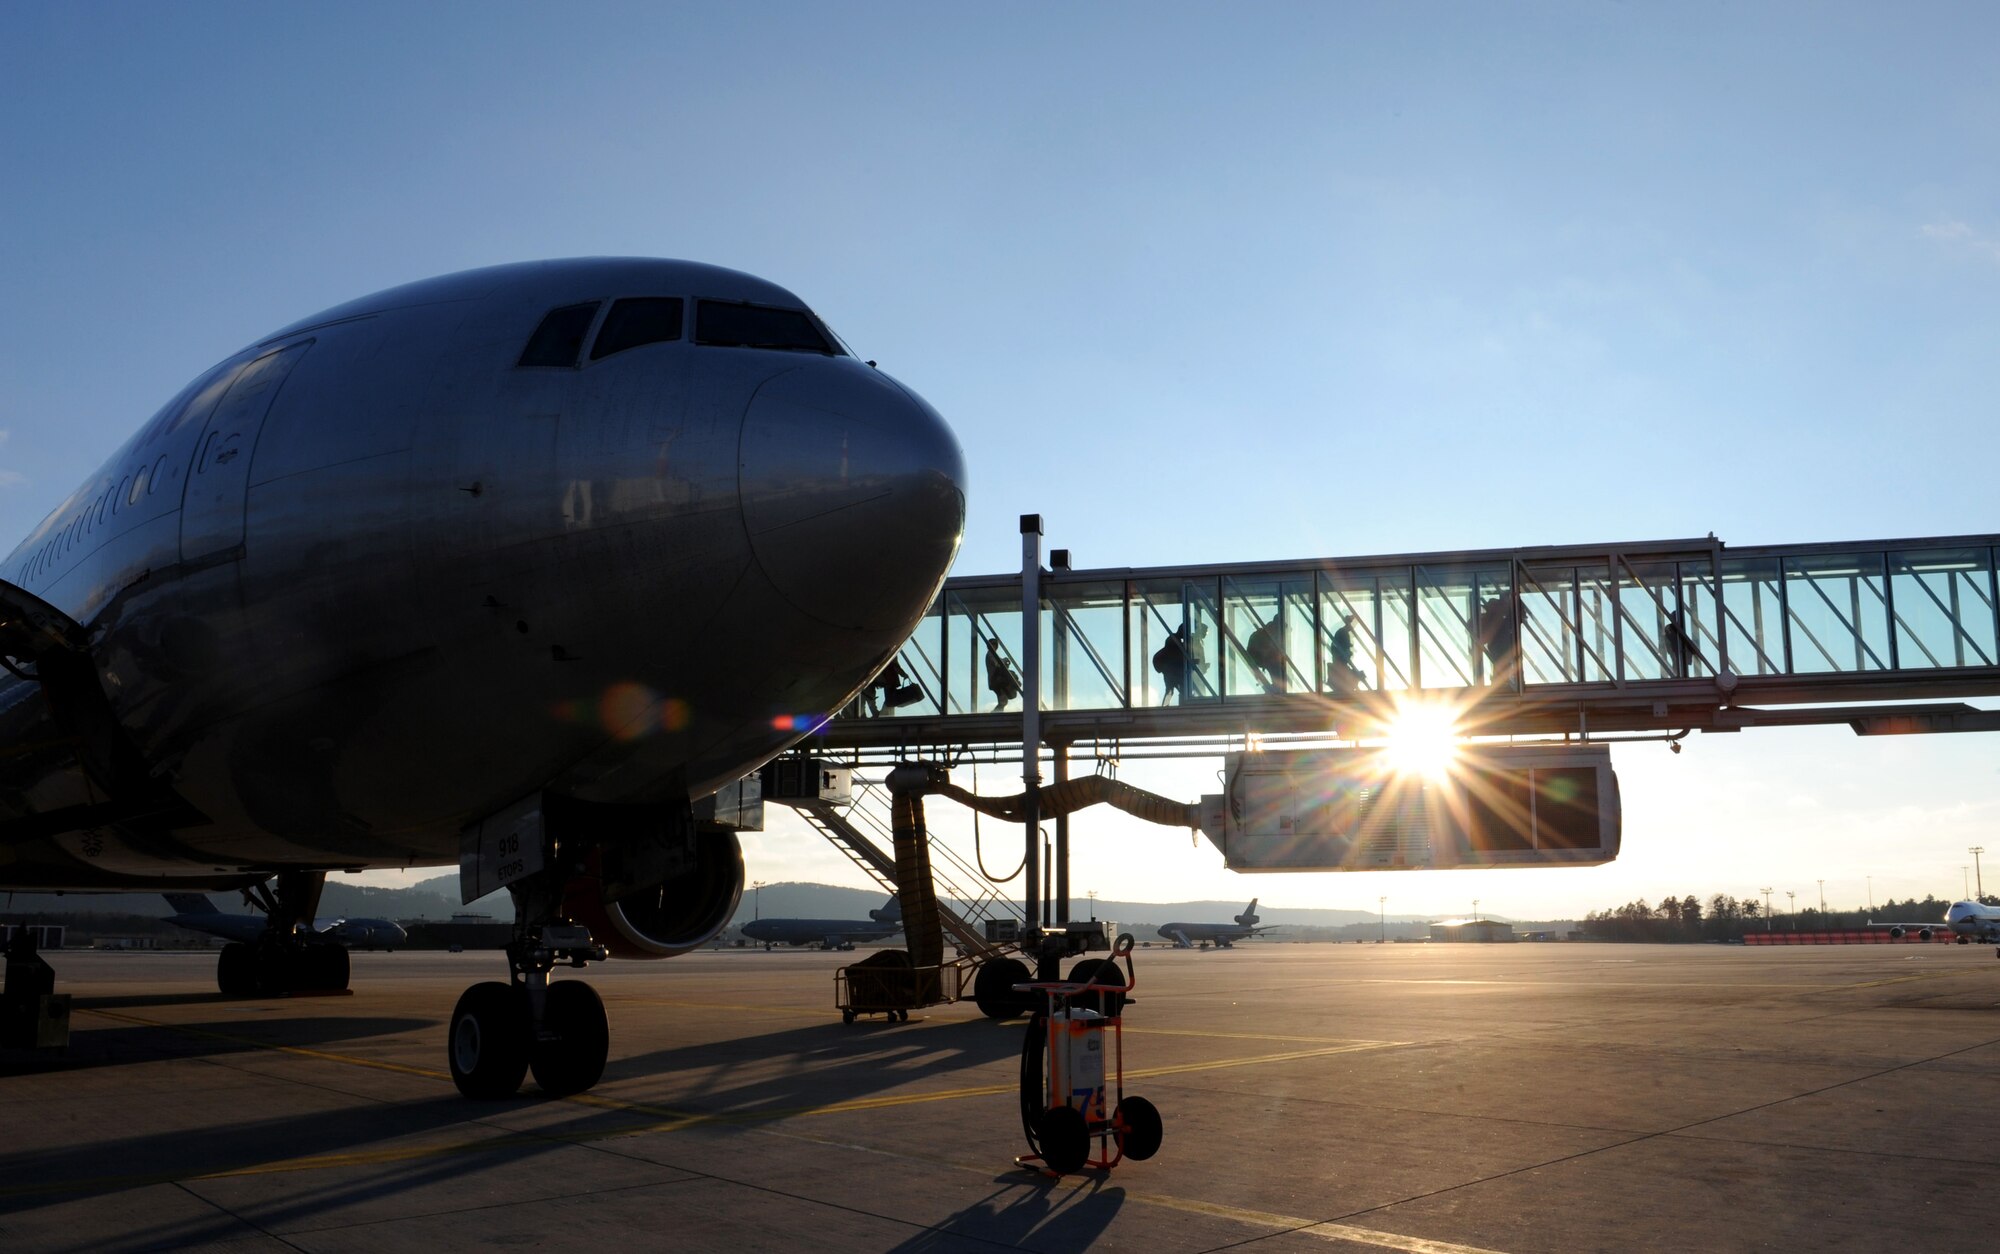 Passengers arriving from Baltimore-Washington International Airport depart an aircraft upon arrival at the Passenger Terminal at Ramstein Air Base, Germany, Feb. 4, 2015. The passenger terminal serves more than 13,000 passengers in an average month. (U.S. Air Force Photo/Airman 1st Class Michael Stuart) 